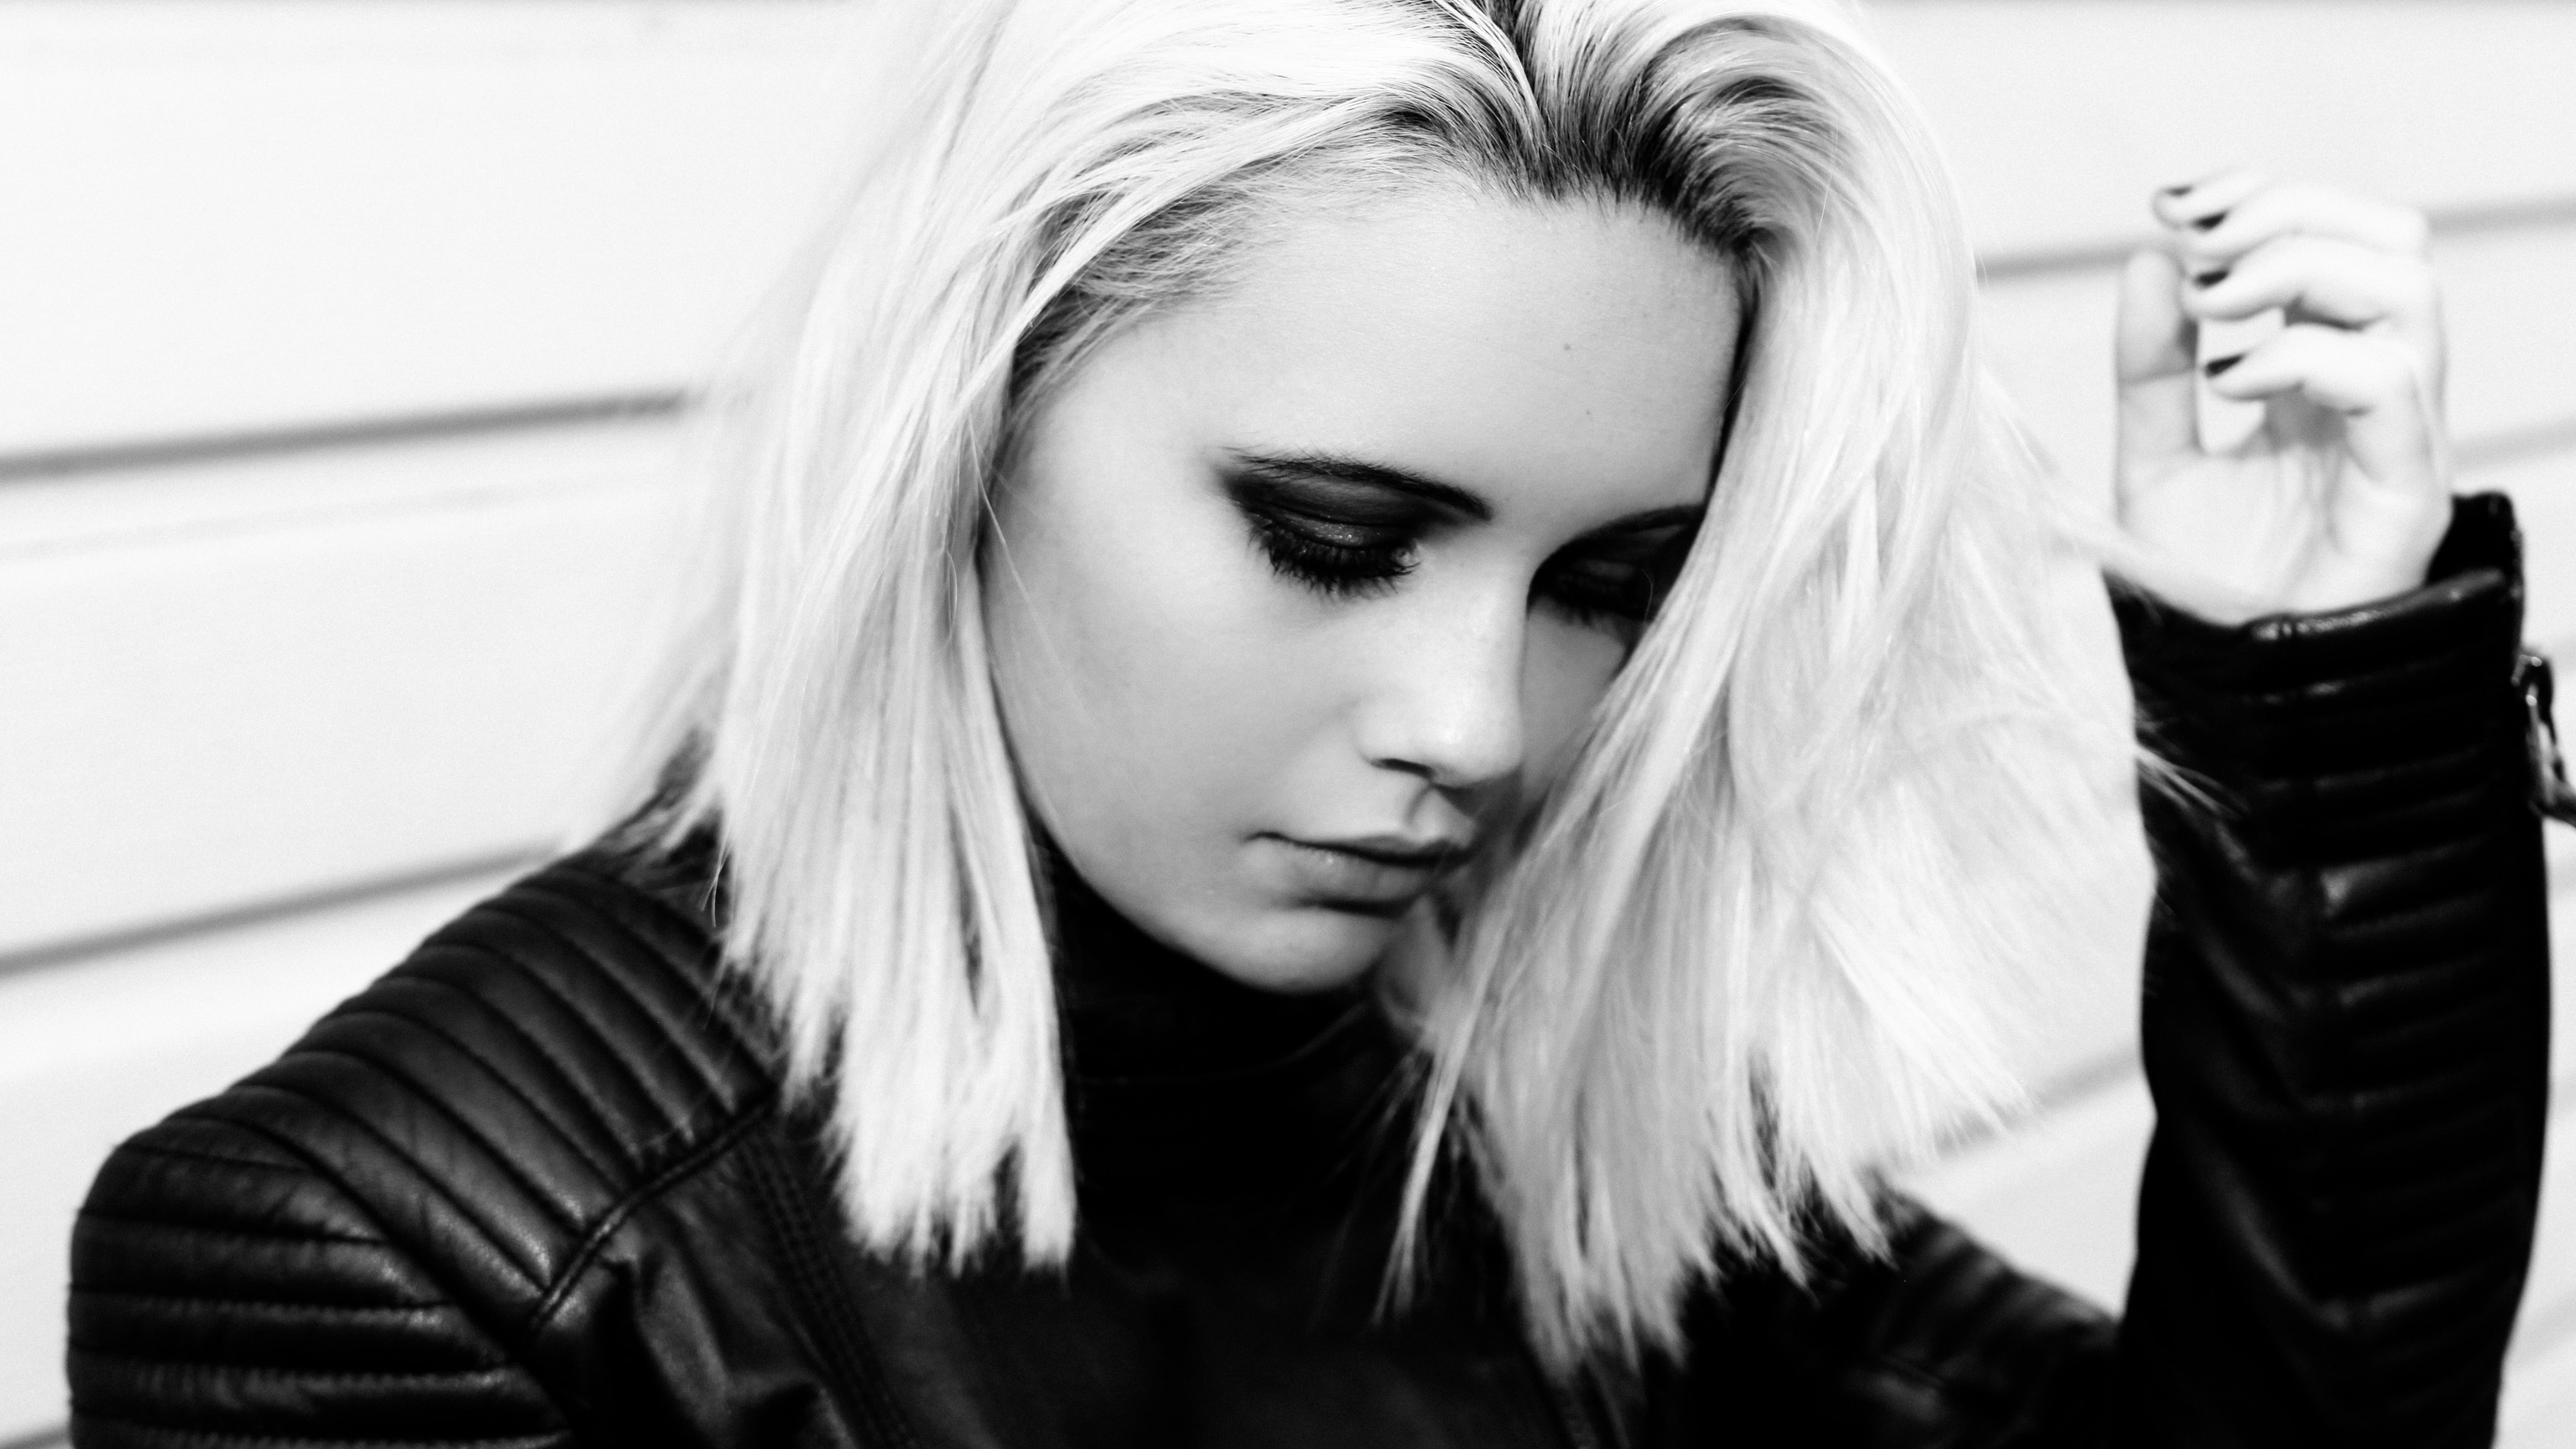 woman wearing black leather jacket grayscale phtoo, Bea Miller